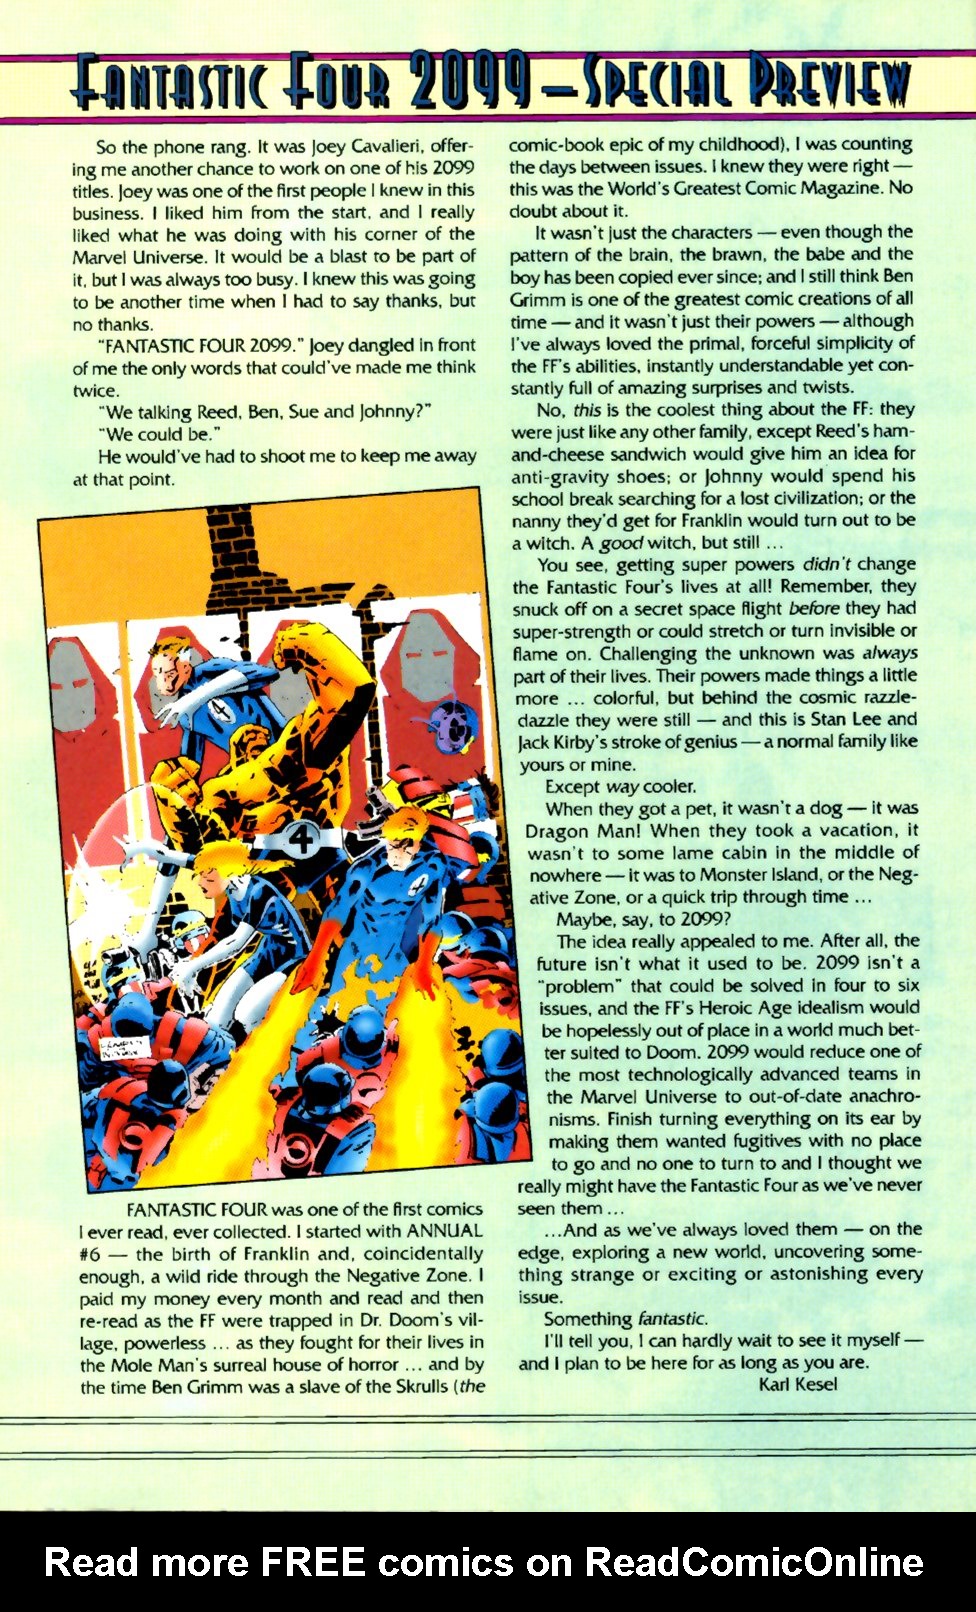 Read online Fantastic Four 2099 comic -  Issue #1 - 30